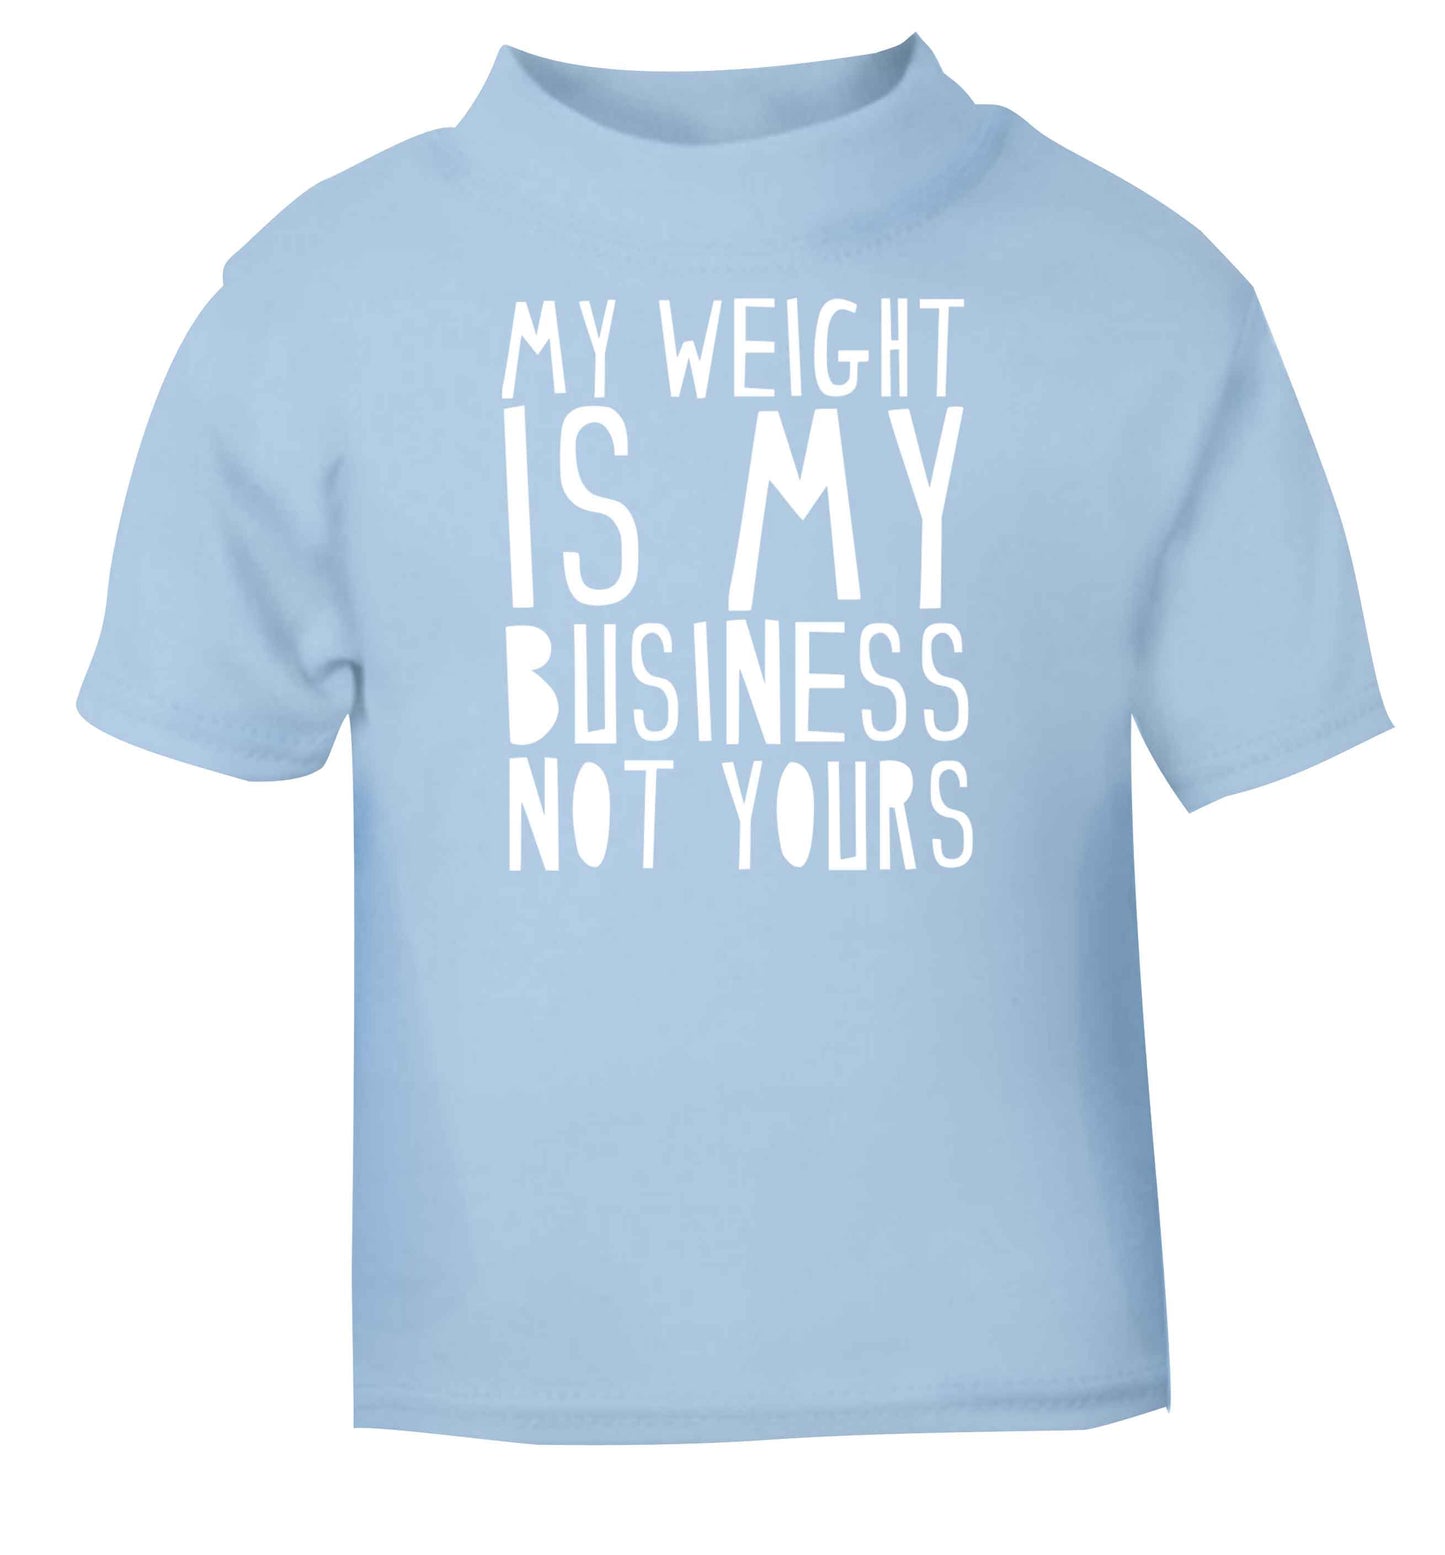 My weight is my business not yours light blue baby toddler Tshirt 2 Years